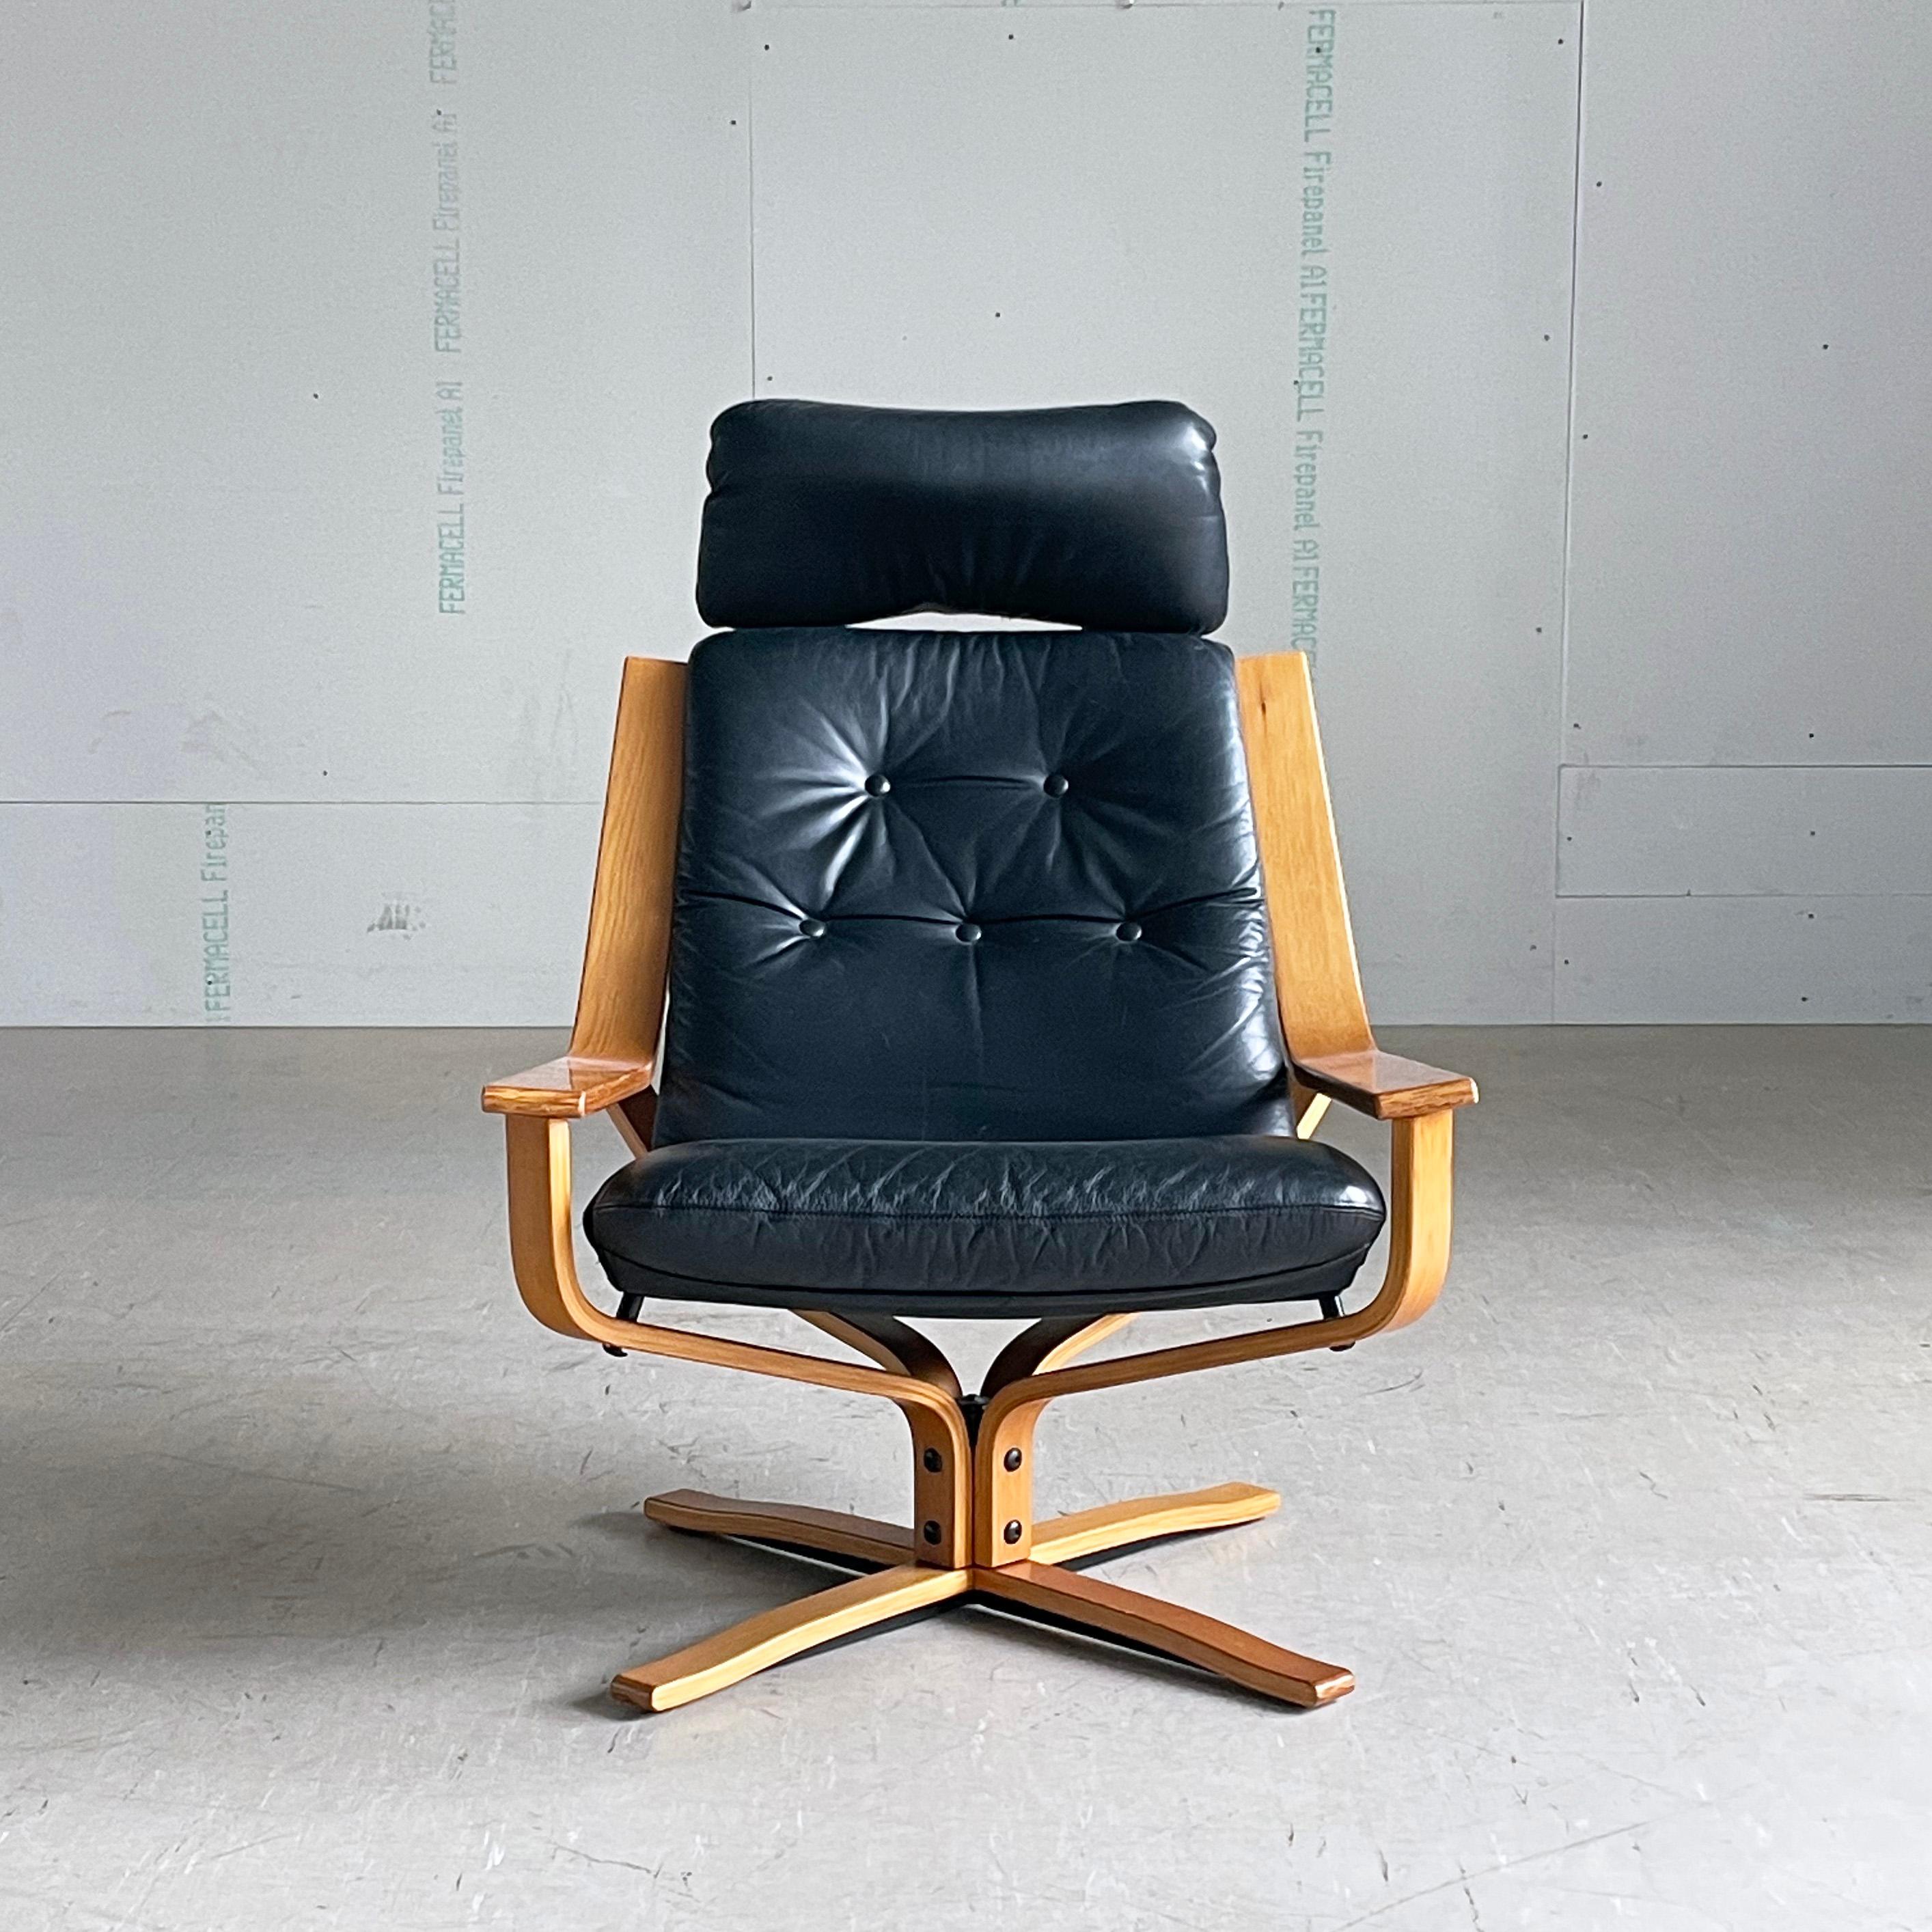 1970's Joe Rufenacht swiveling leather Lounge Chair, produced by JR Furniture, Australia. Padded black leather seat and back rest on a swiveling bentwood base. In beautiful condition.
